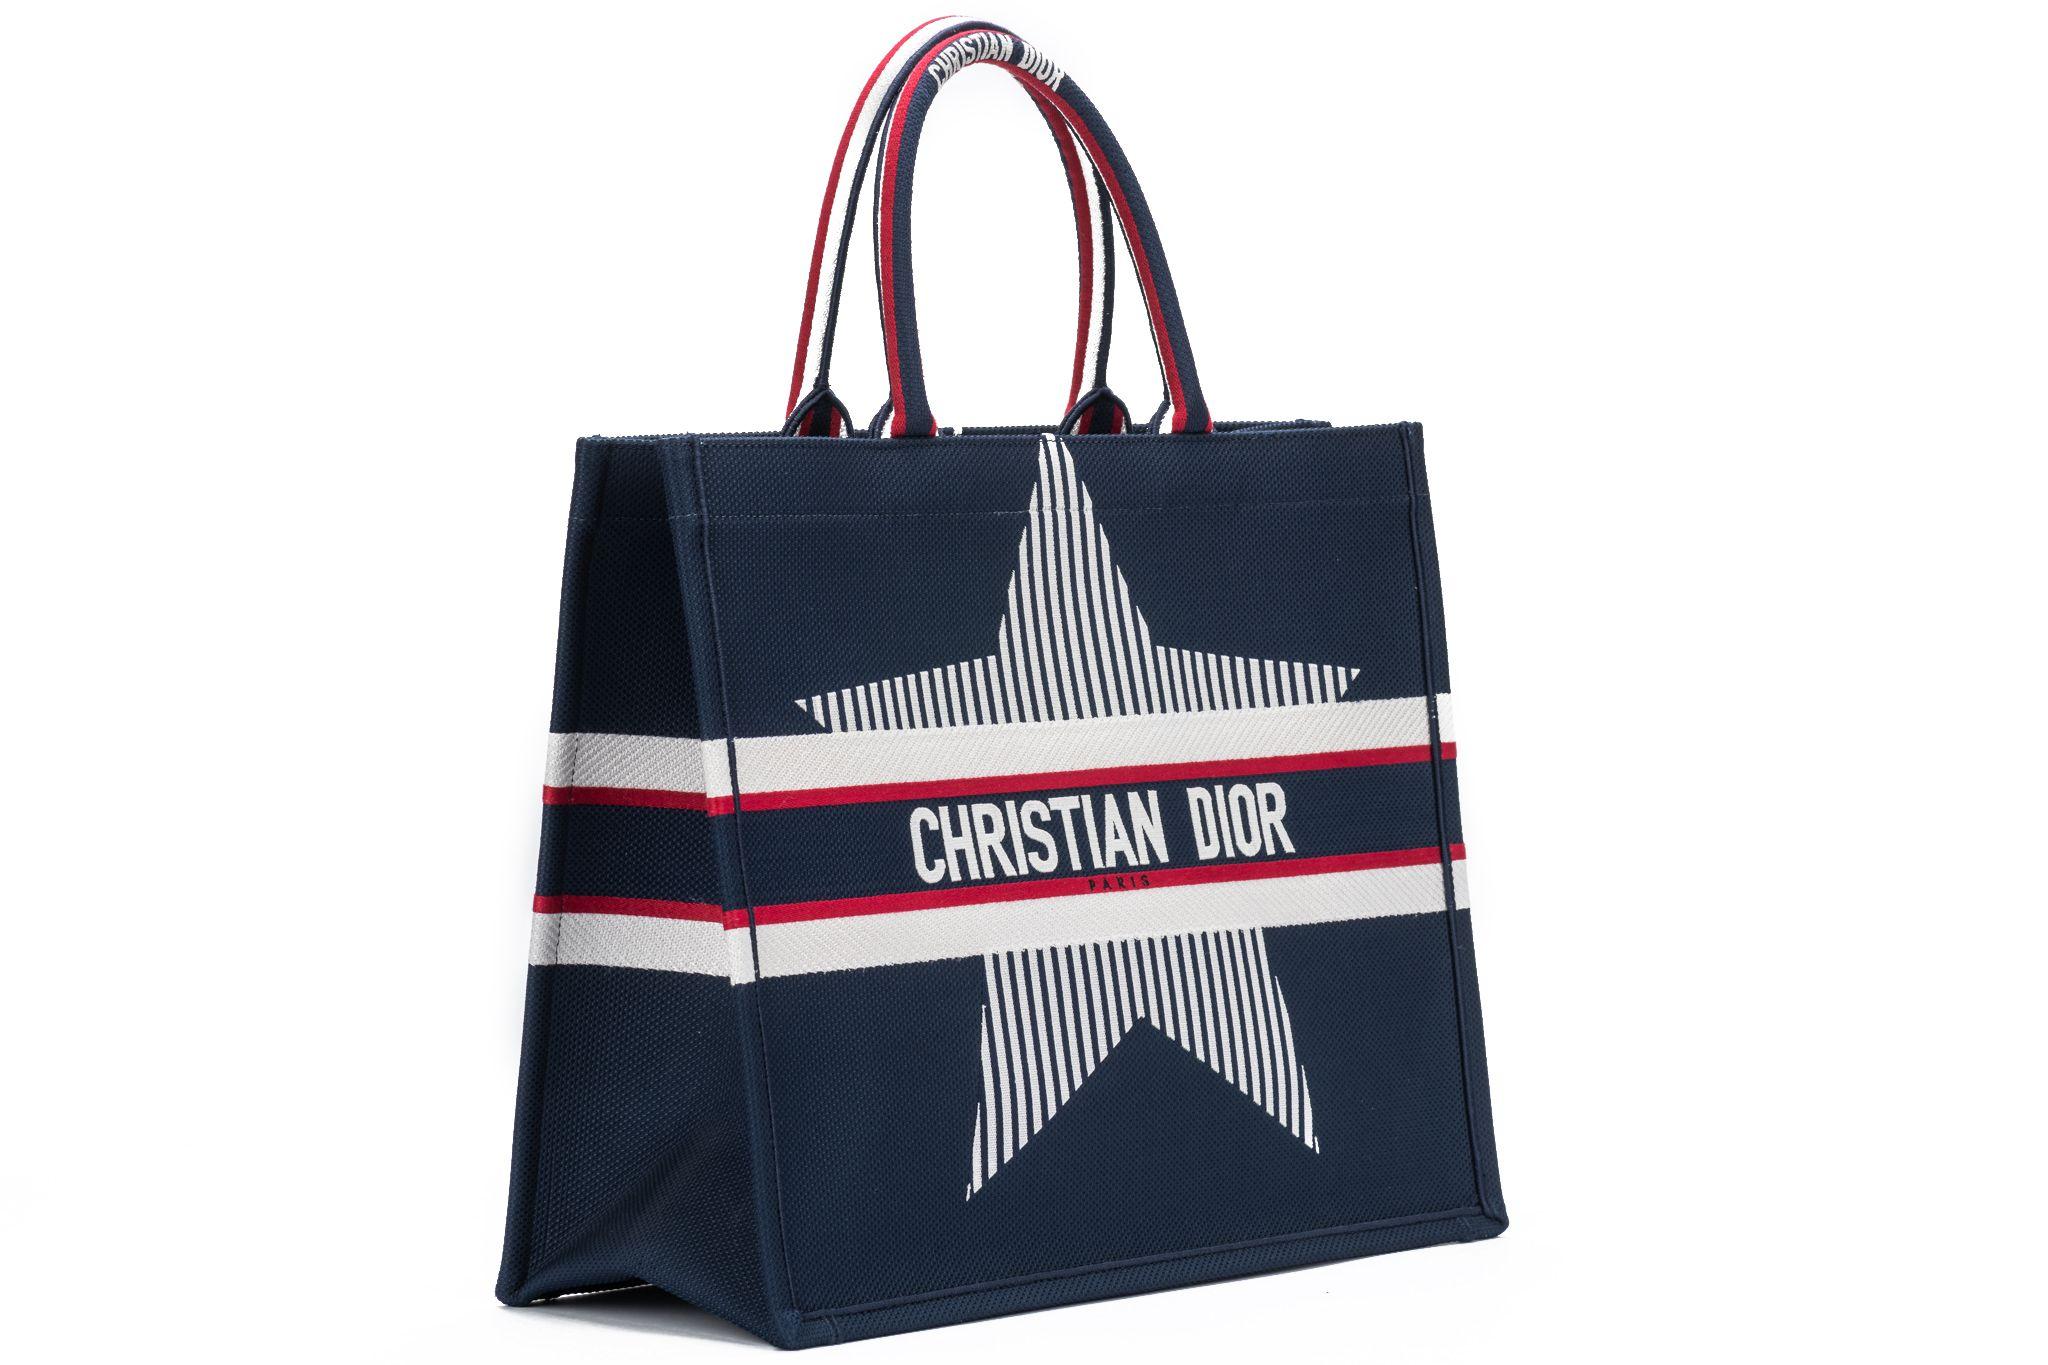 DIOR brand new large Alps book tote in navy blue with a white star in the center written Christian Dior over it. The piece comes with the original dustcover. The handles are 6.25 inches.